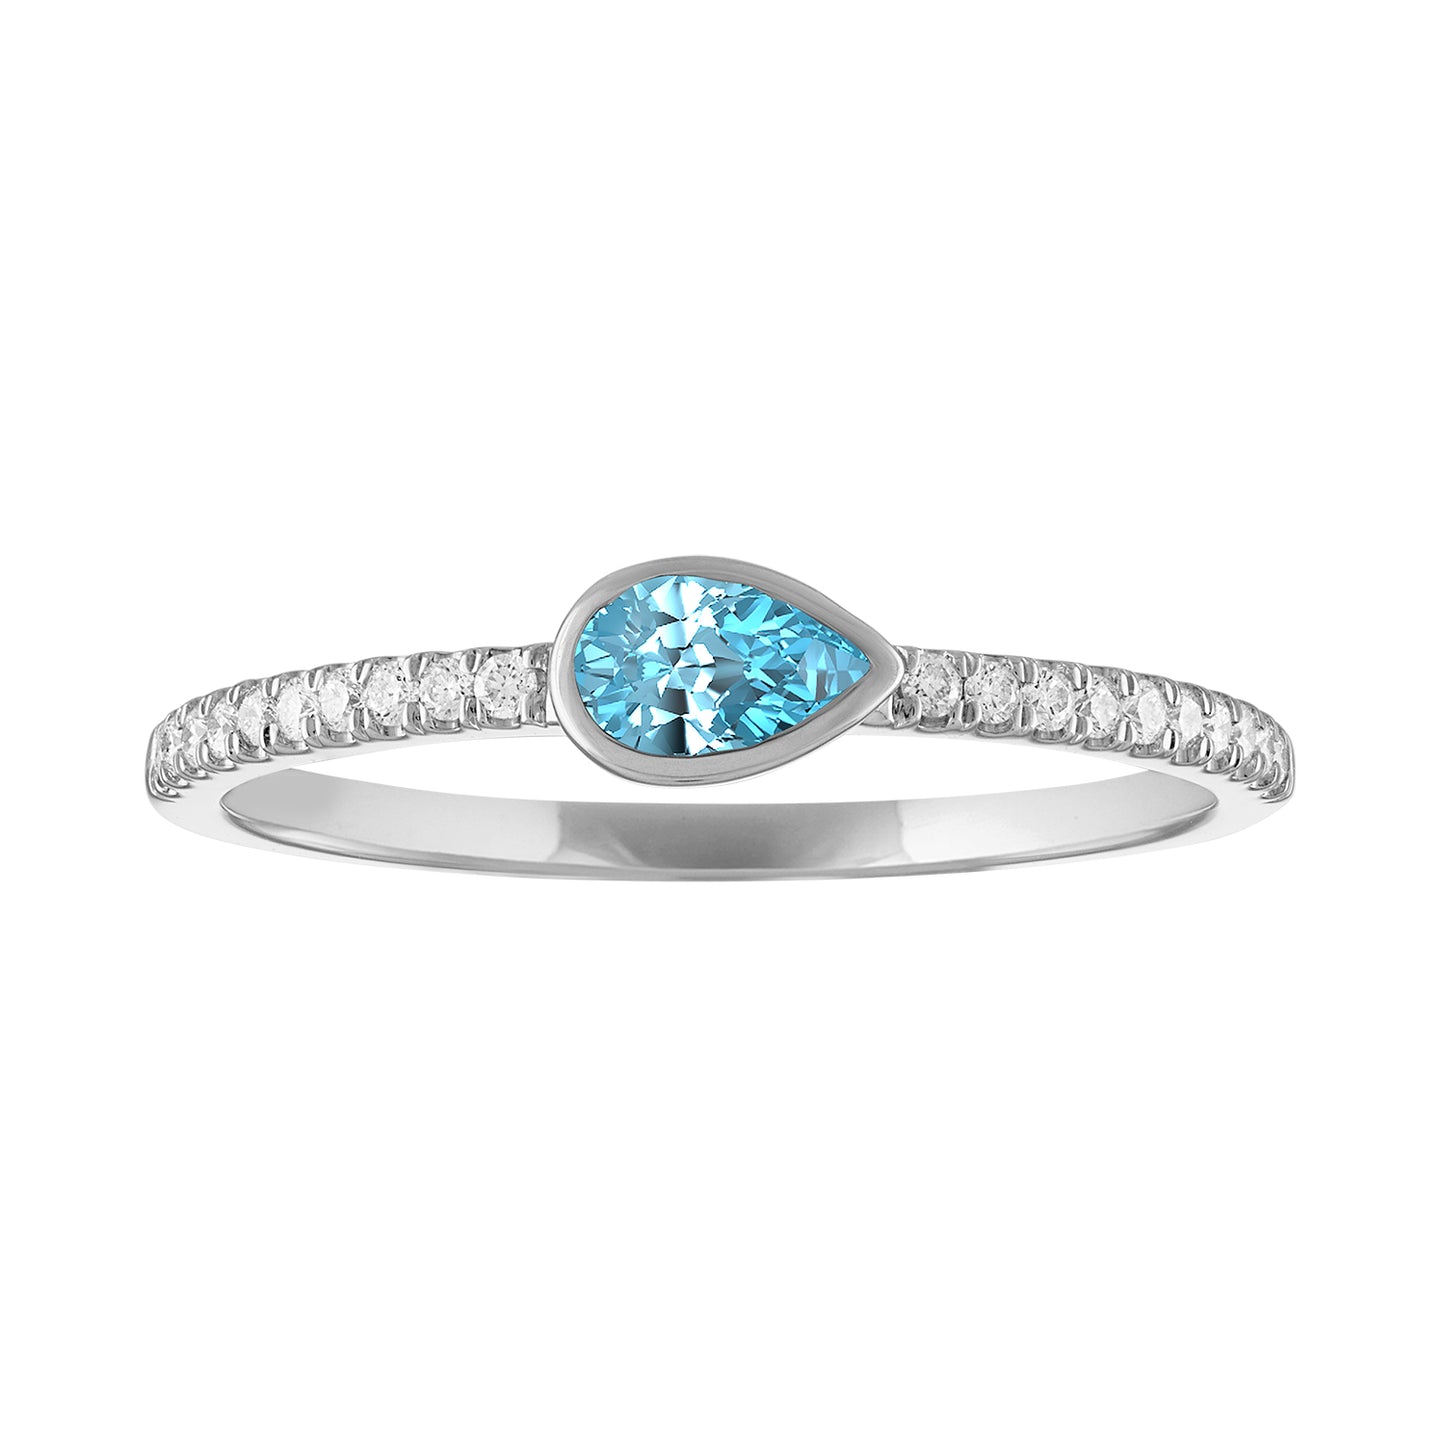 White gold skinny band with a bezeled pear shape aquamarine in the center and round diamonds on the shank. 